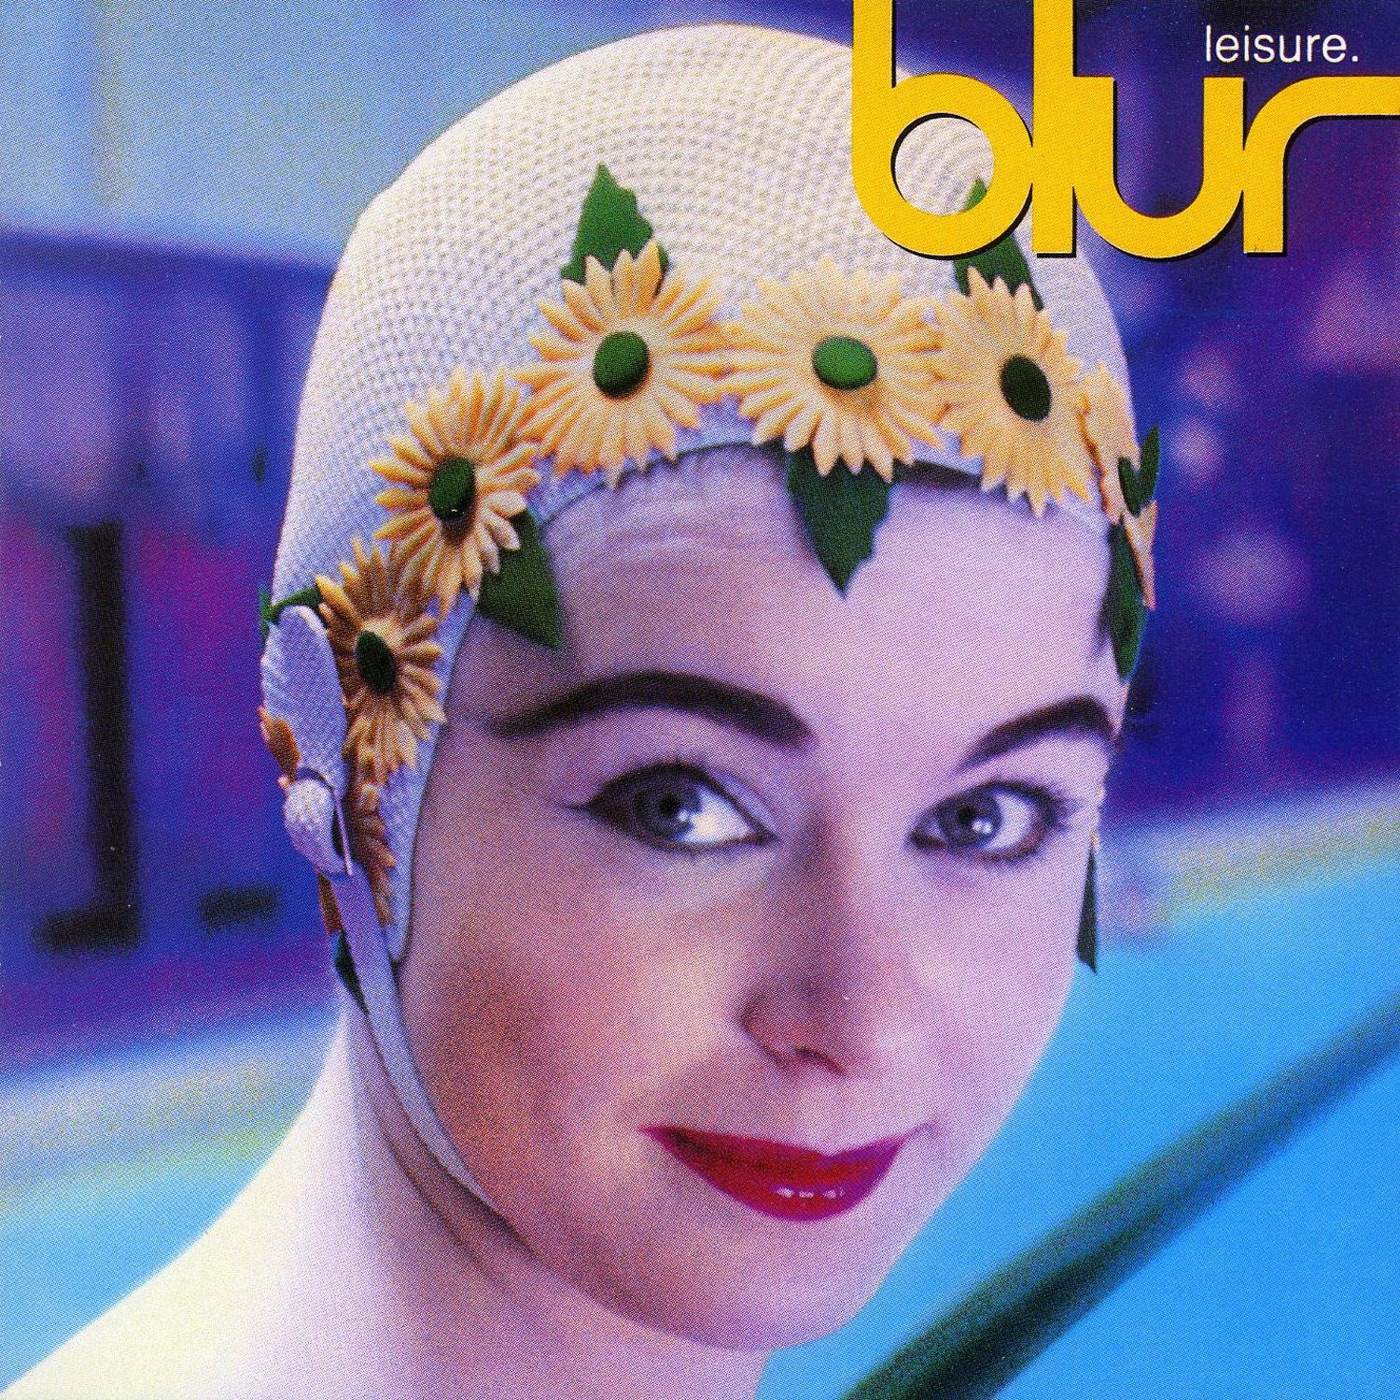 There's No Other Way by Blur